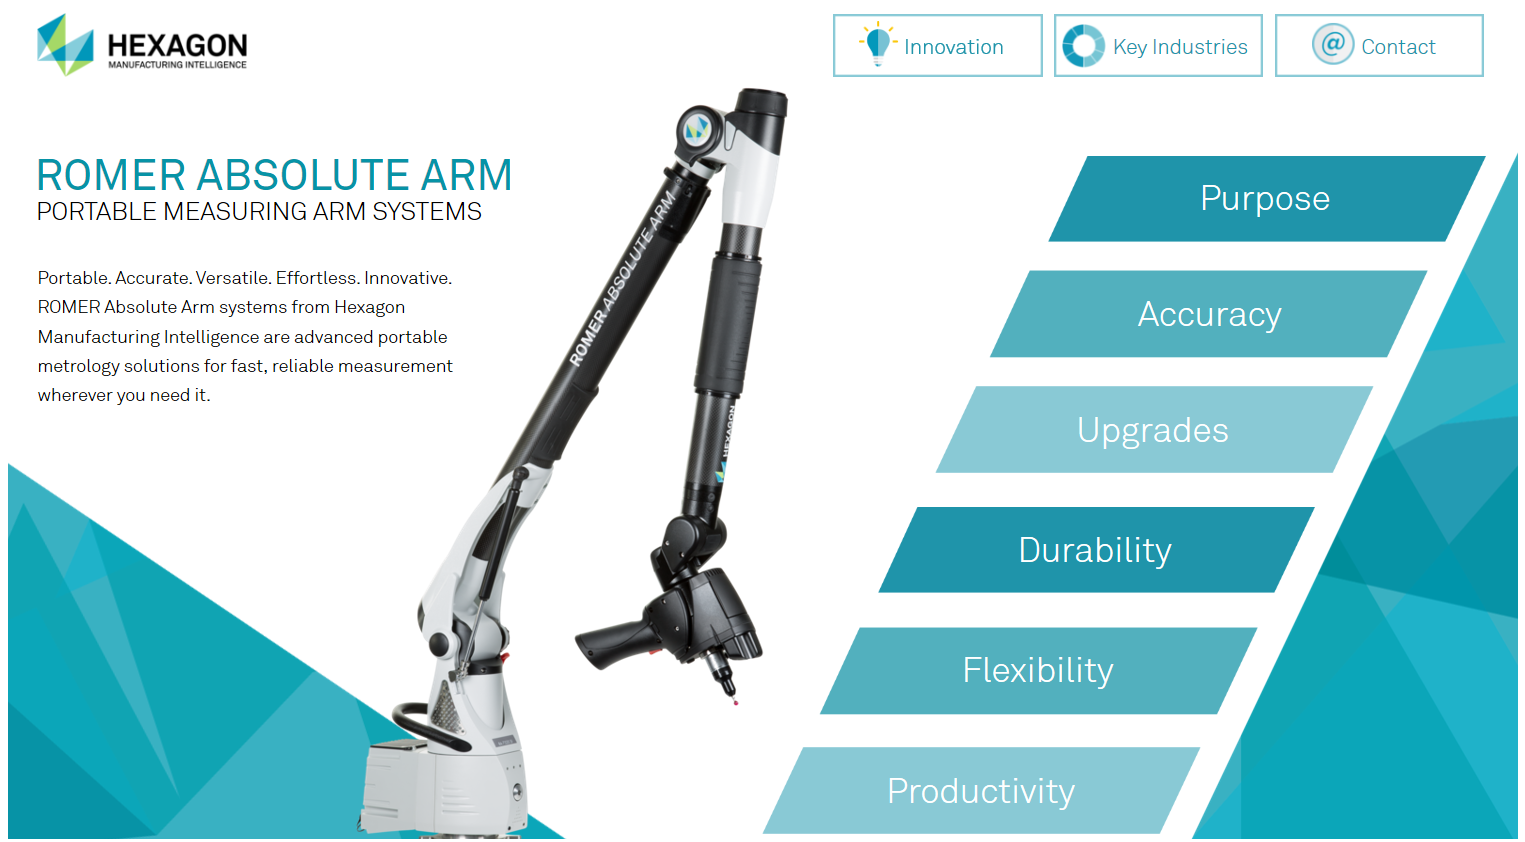 Image of the Romer Absolute Arm device by Hexagon Manufacturers